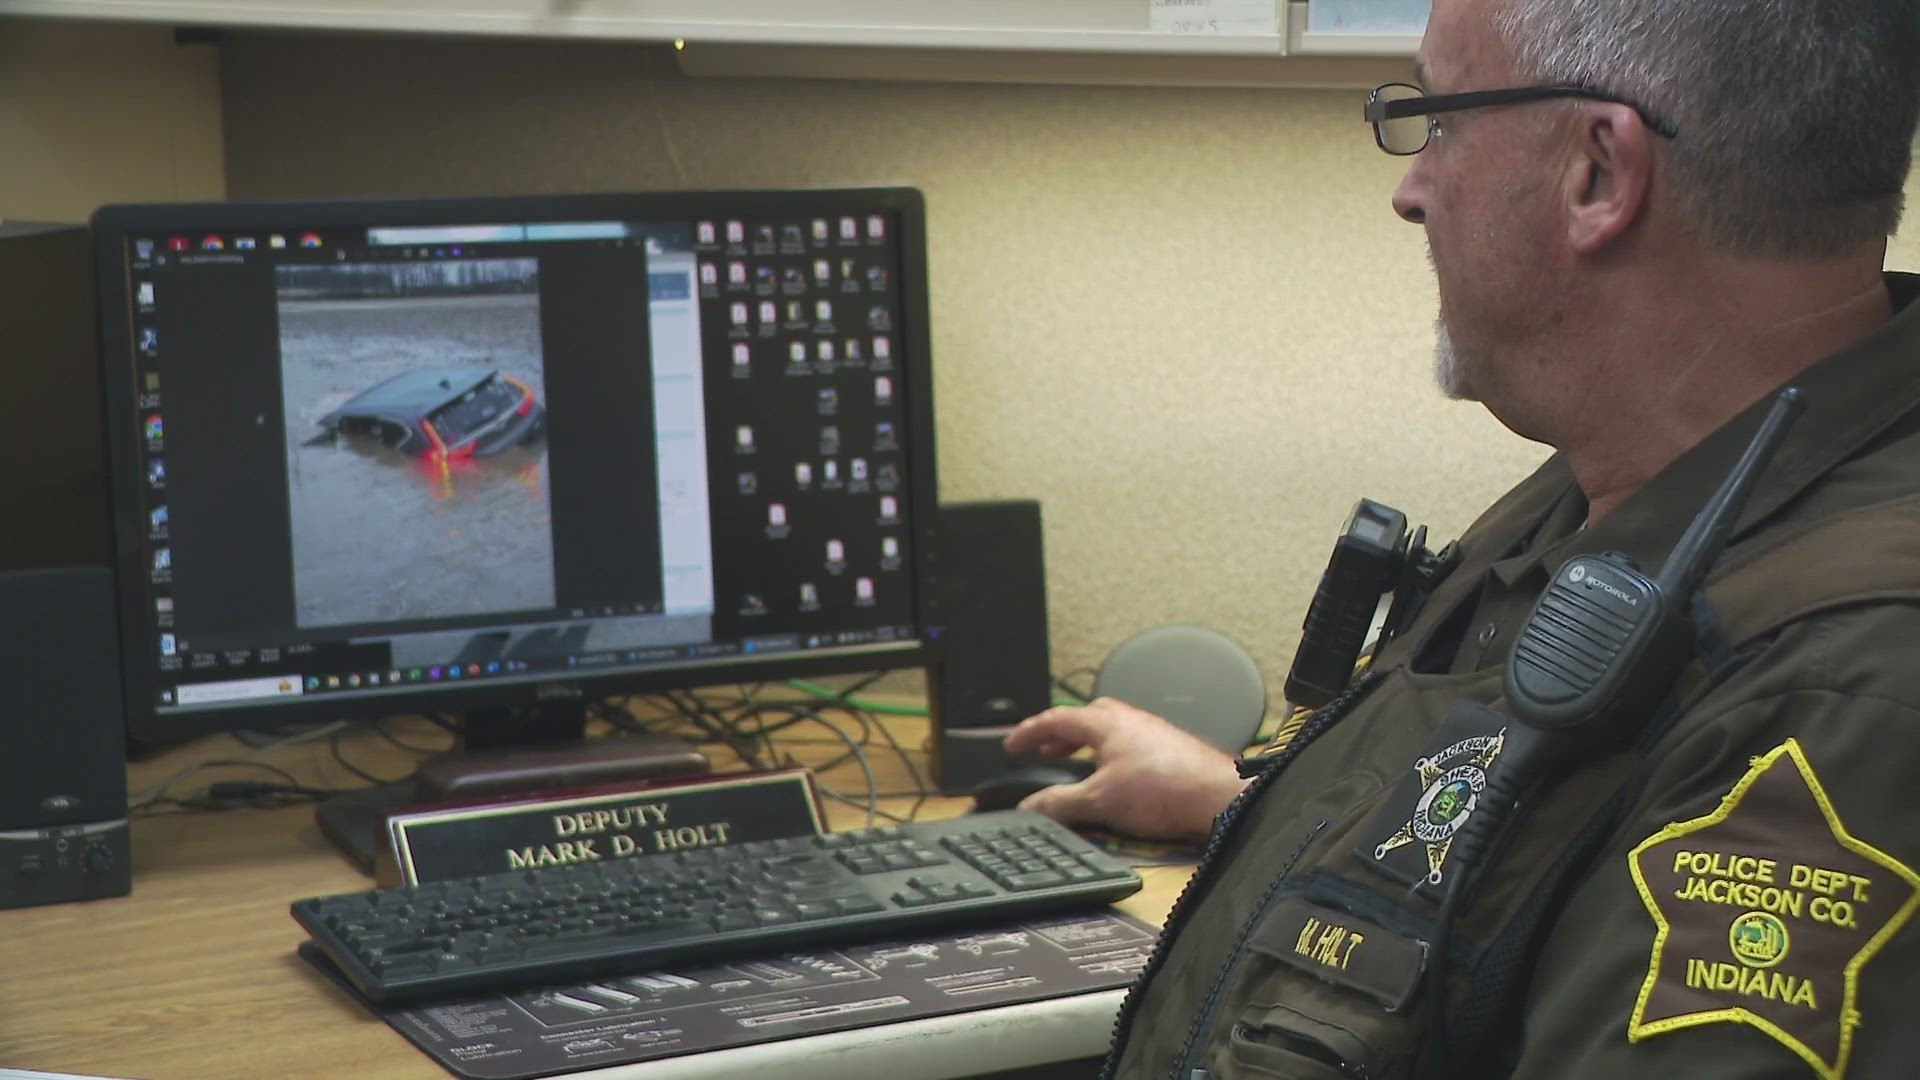 Deputy Mark Holt said it was divine intervention that put him in the right place at the right time.